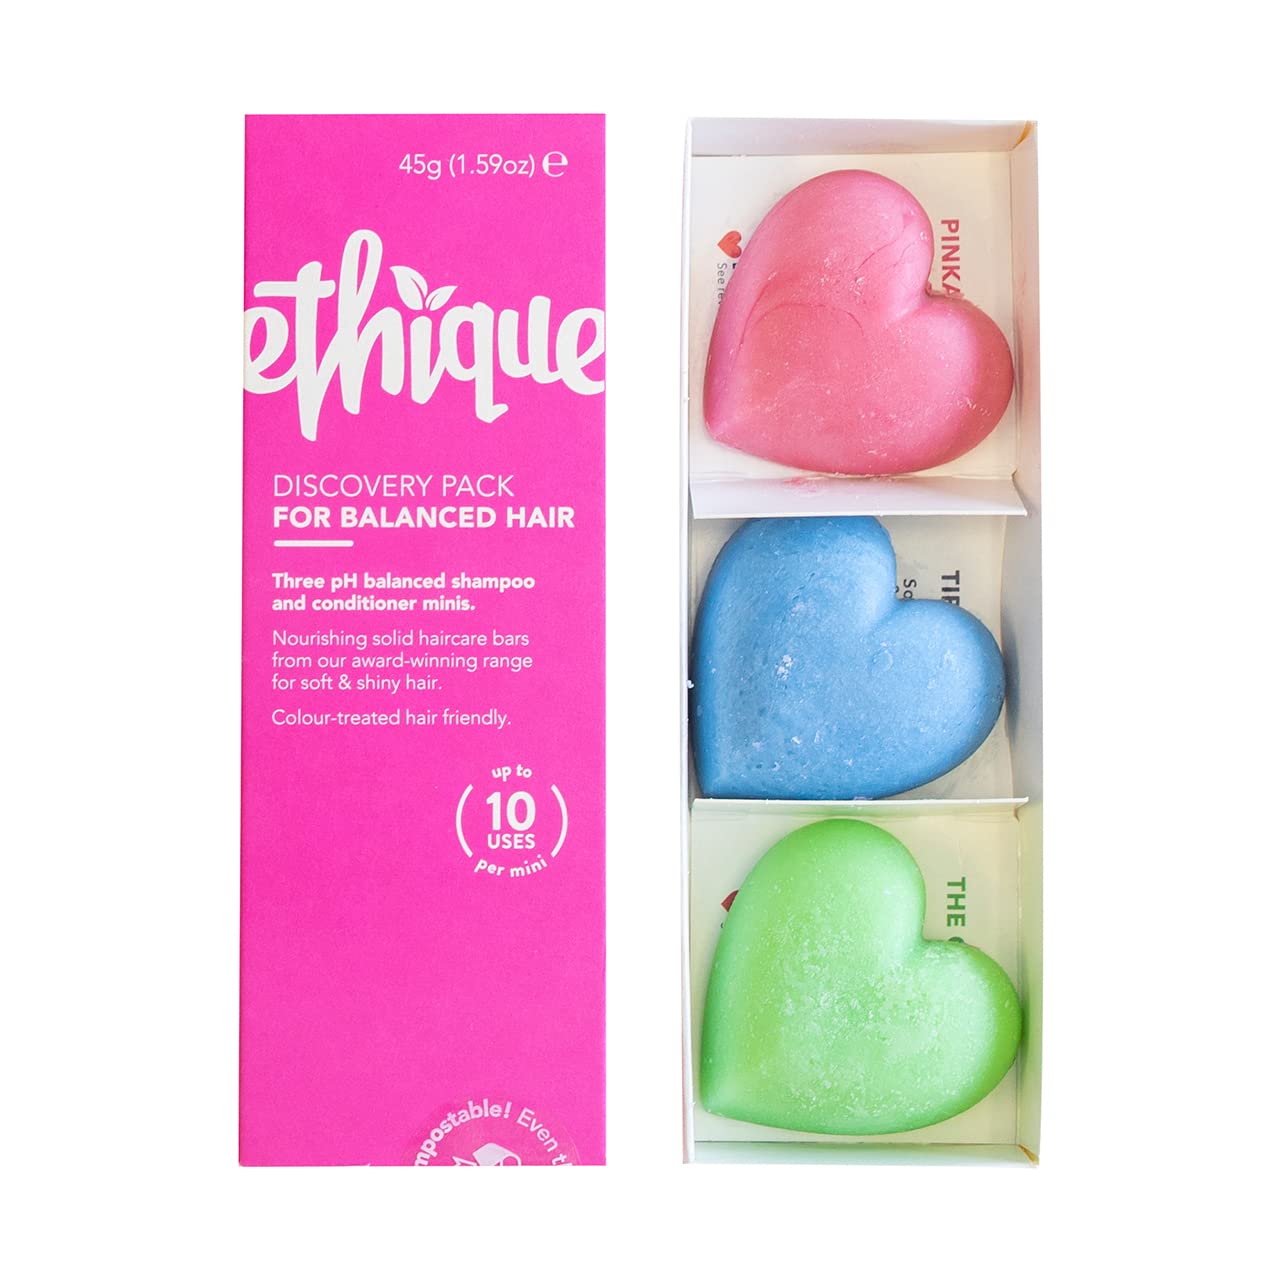 Ethique Discovery Pack for Balanced Hair - Shampoo & Conditioner - Plastic-Free, Vegan, Cruelty-Free, Eco-Friendly, 3 Travel Bars, 1.59 oz (Pack of 1)